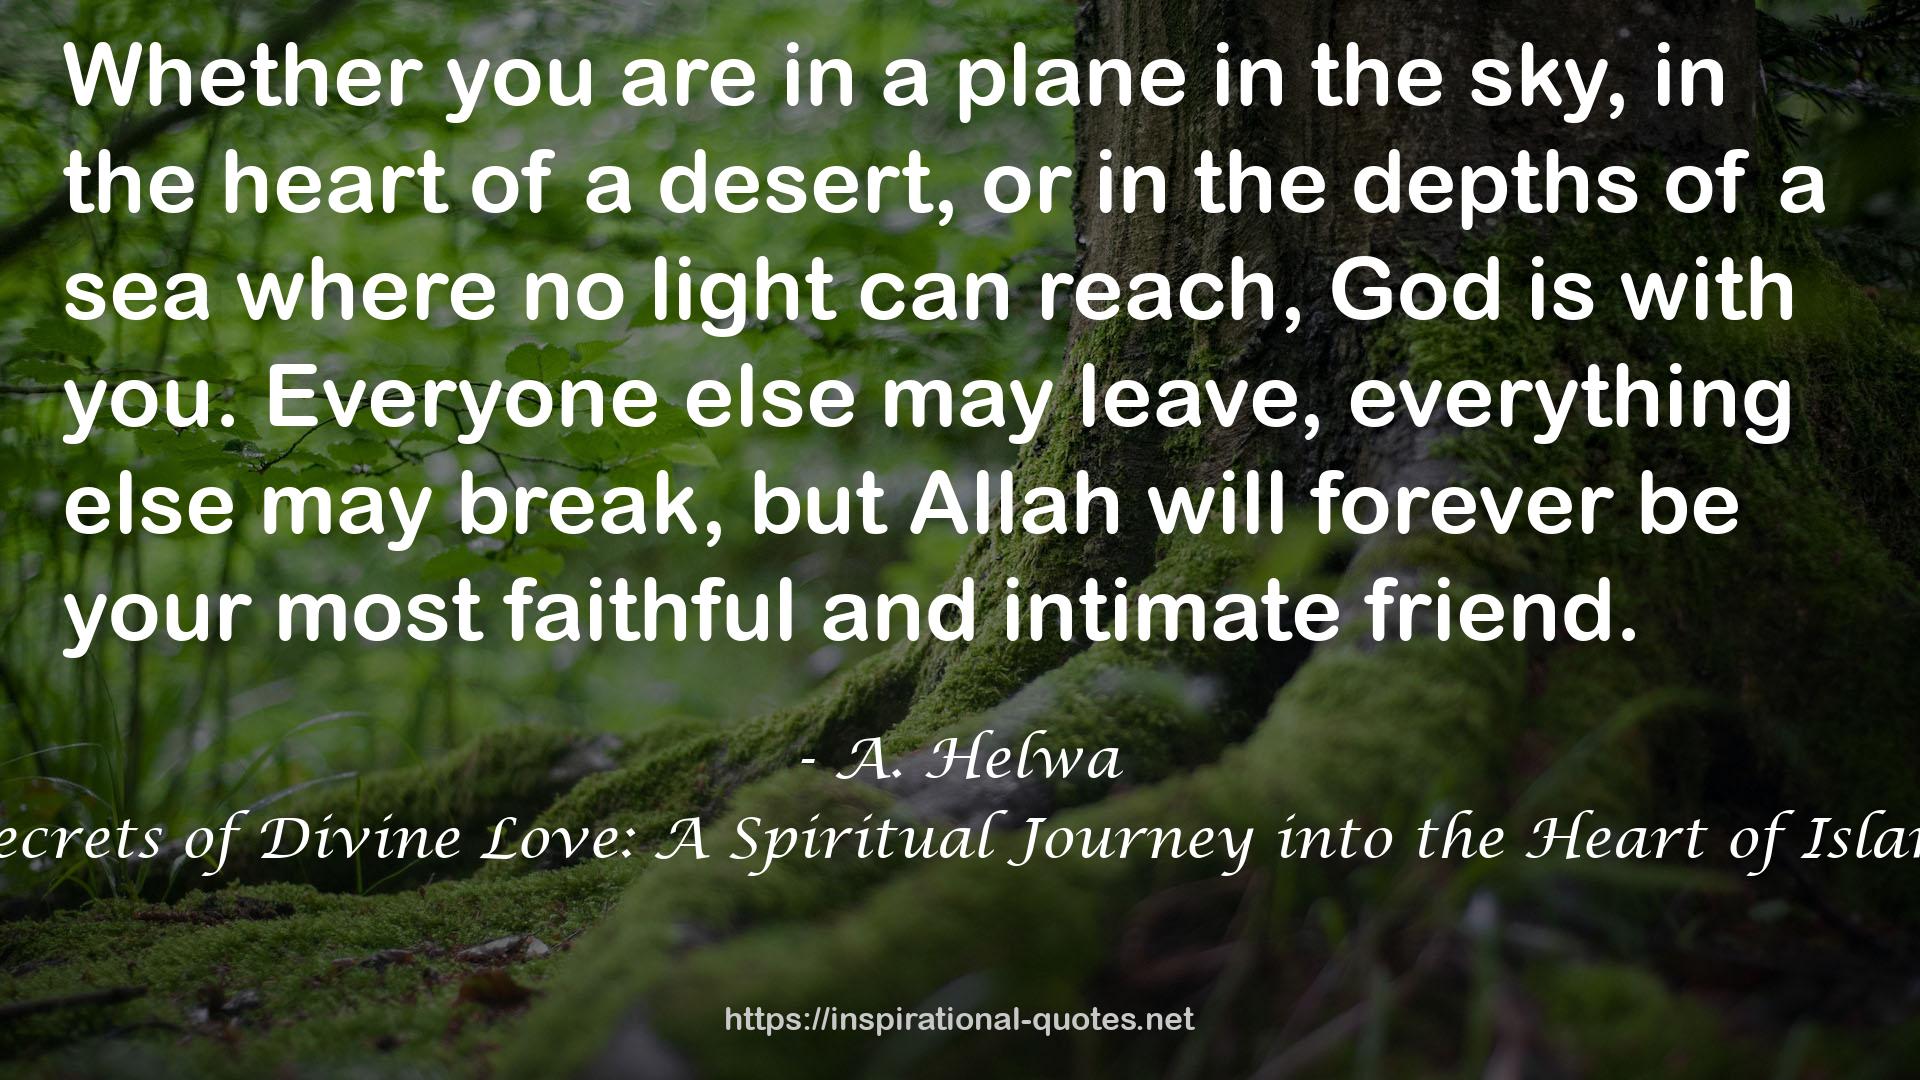 Secrets of Divine Love: A Spiritual Journey into the Heart of Islam QUOTES